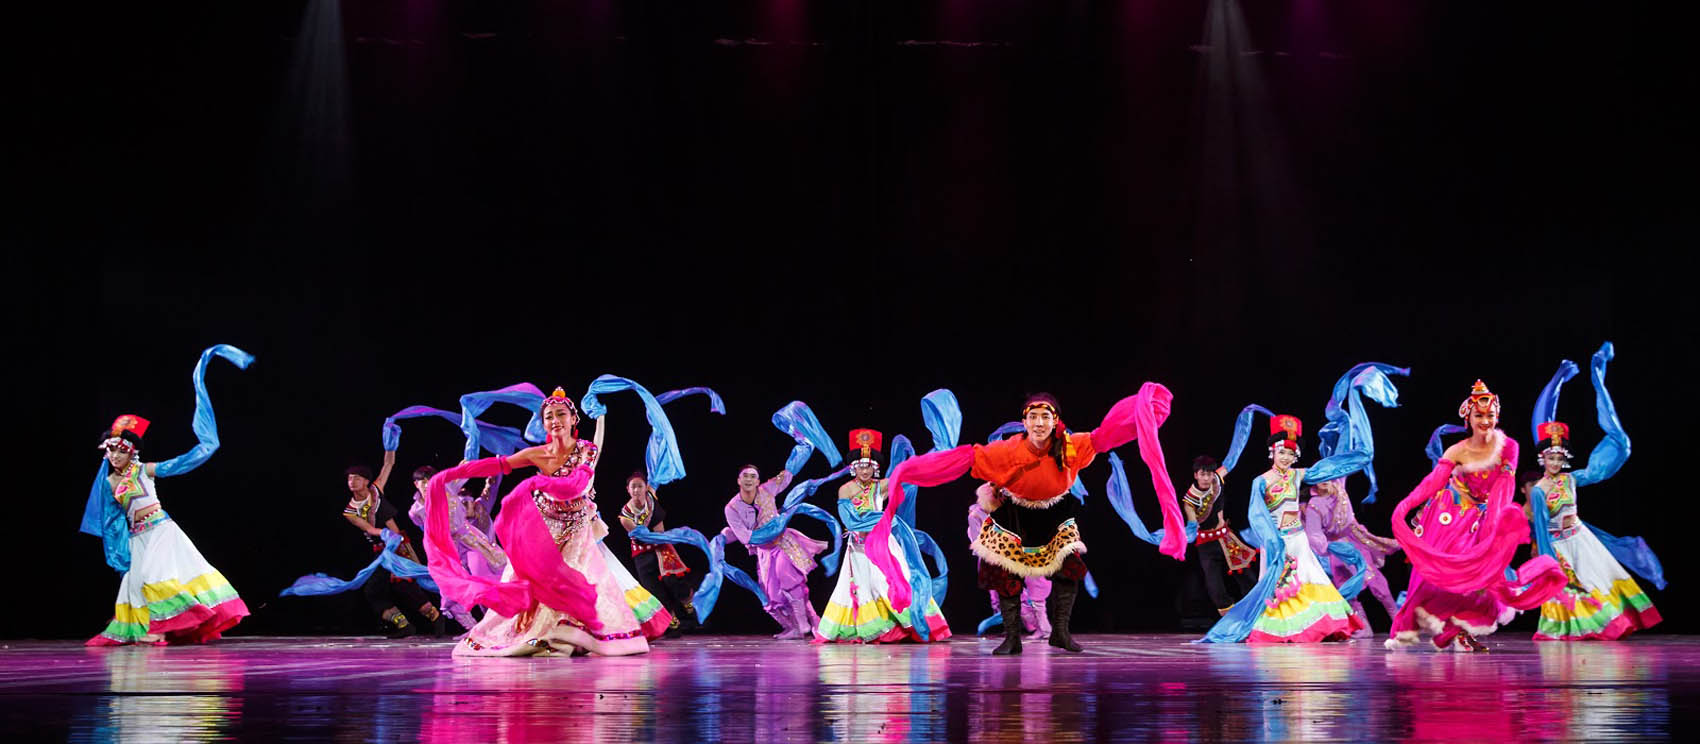 CCCC will host Chinese Culture & Arts performance